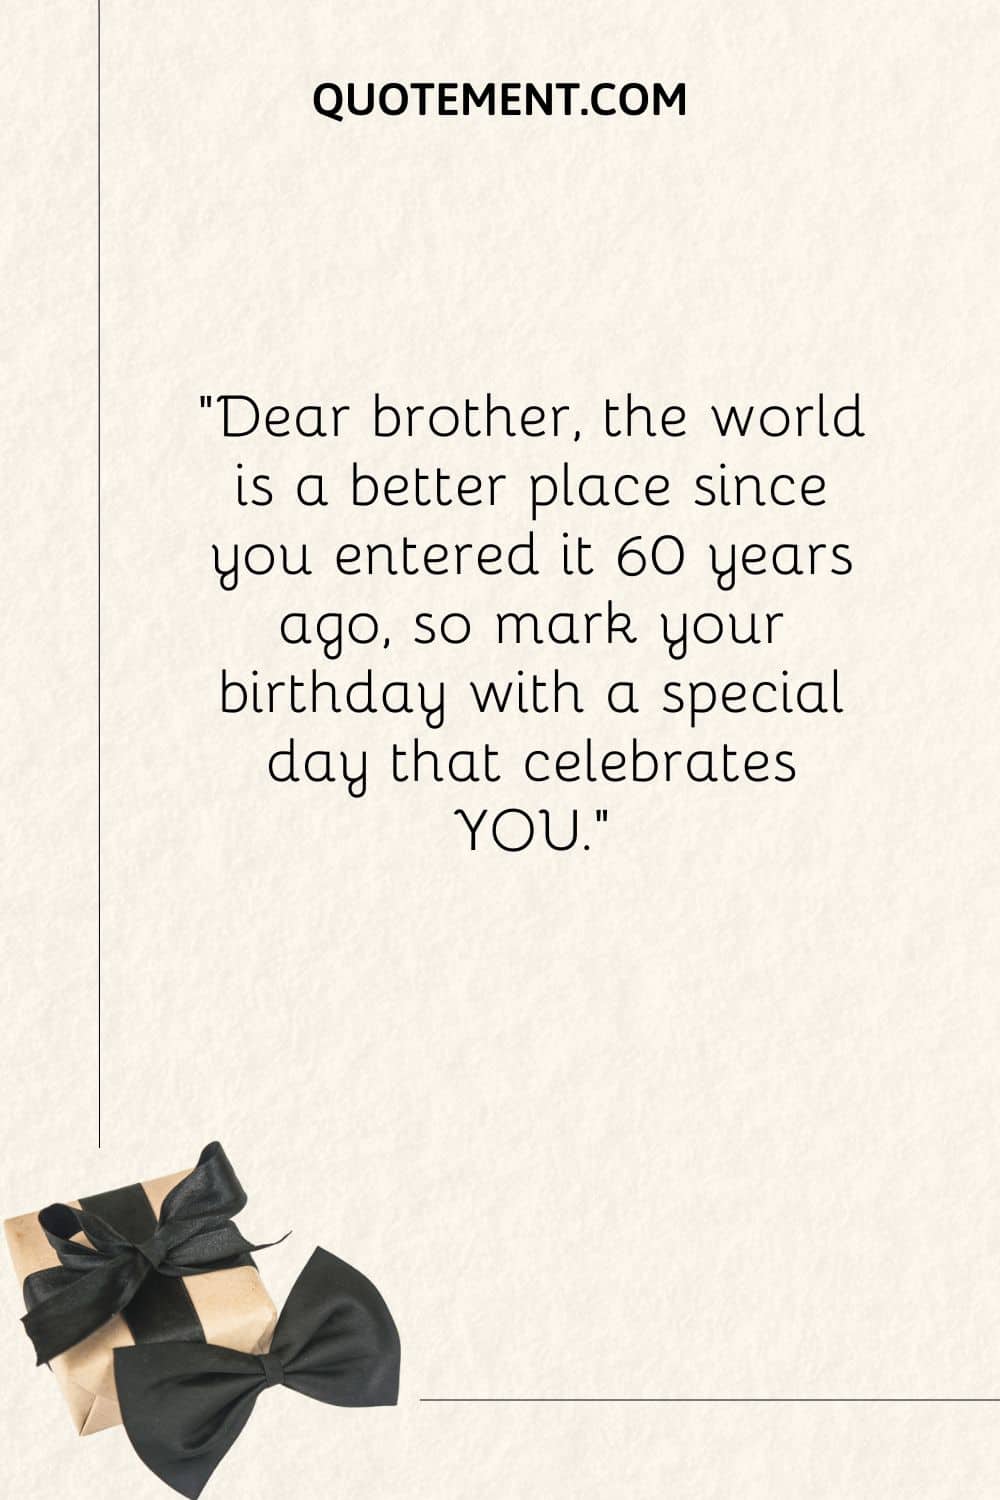 Dear brother, the world is a better place since you entered it 60 years ago, so mark your birthday with a special day that celebrates YOU